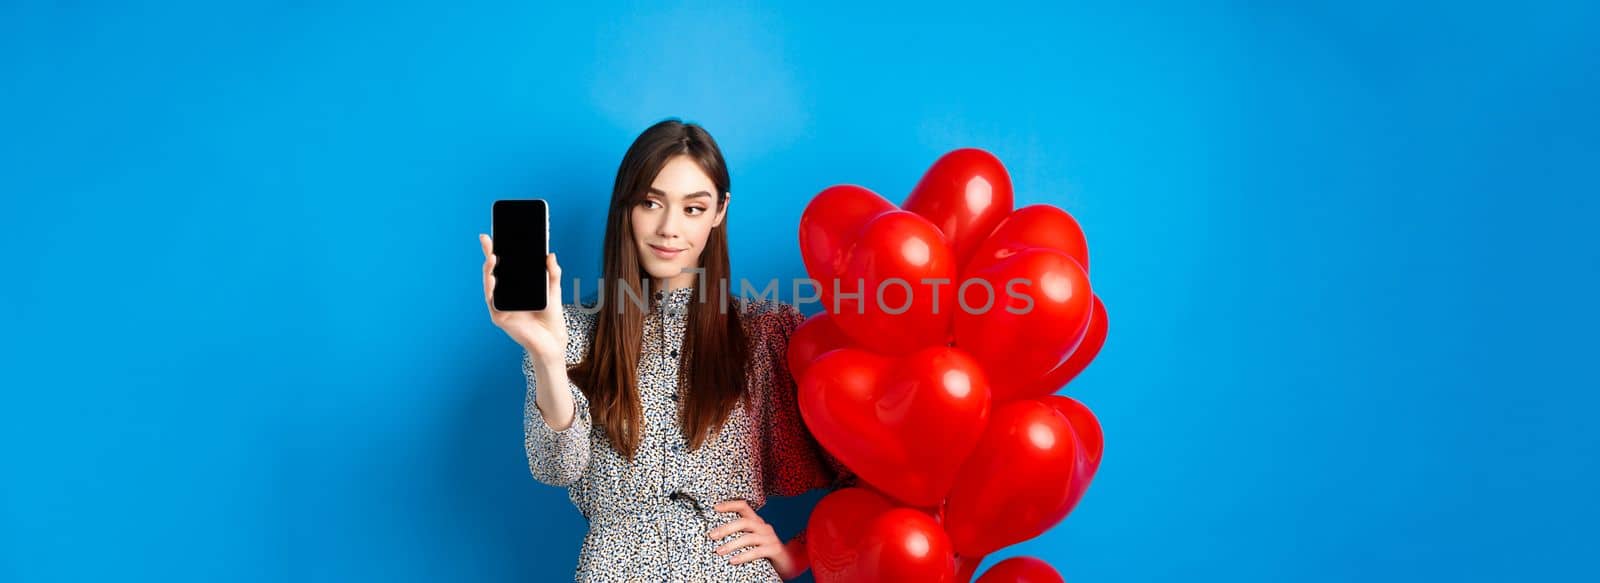 Valentines day. Pretty smiling woman in dress showing empty smartphone screen, standing near romantic balloons, blue background by Benzoix